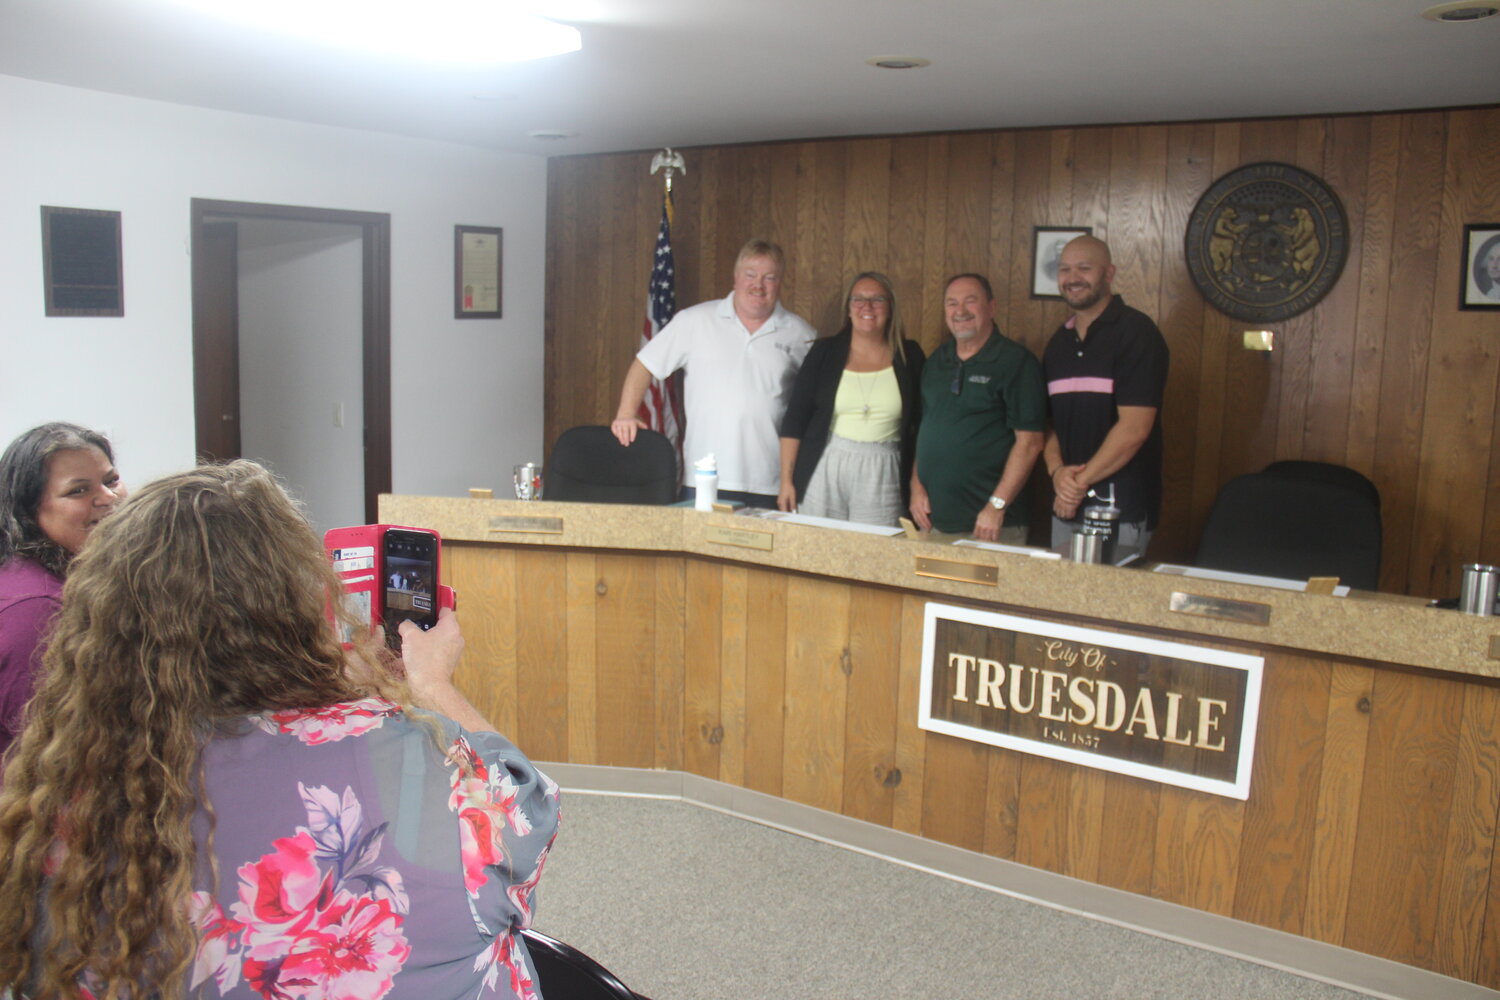 Truesdale City Treasurer Missy Bachamp takes a photo of new Mayor Jerry Cannon and the current board of alderman, from right, Mike Thomas, Keri Hartley, and Joe Brooks.